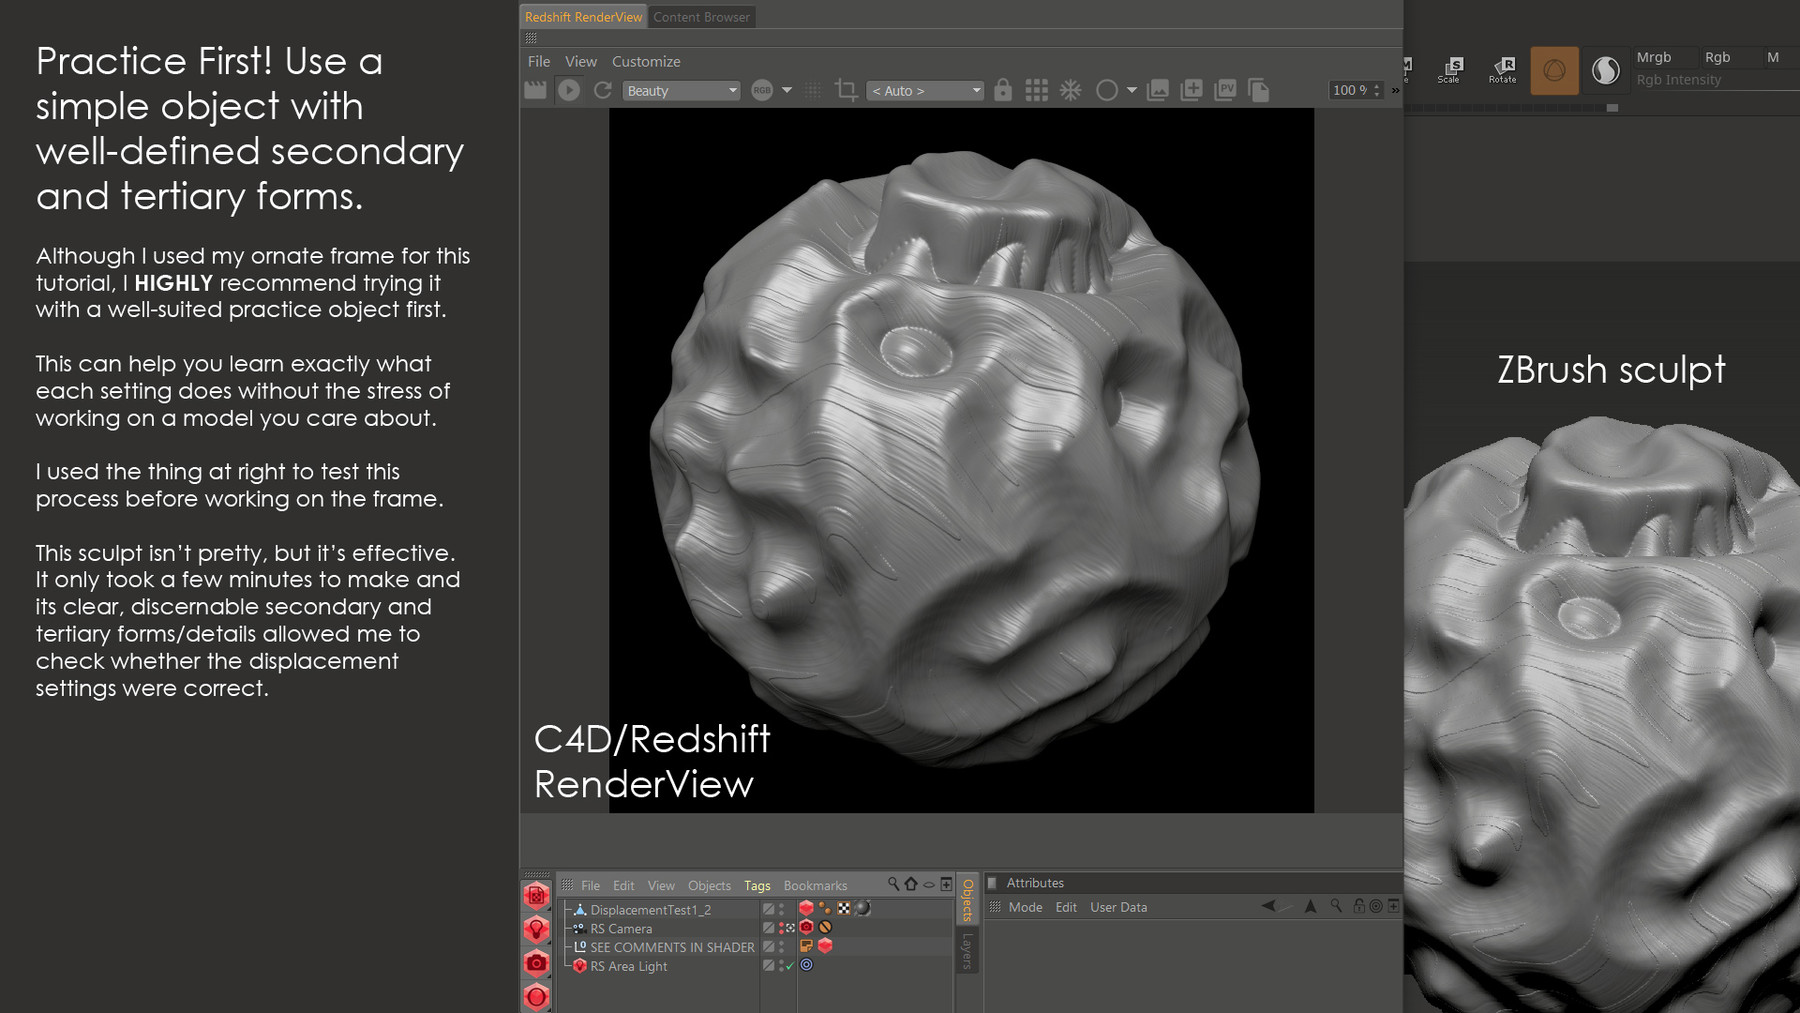 zbrush and cinema 4d integration